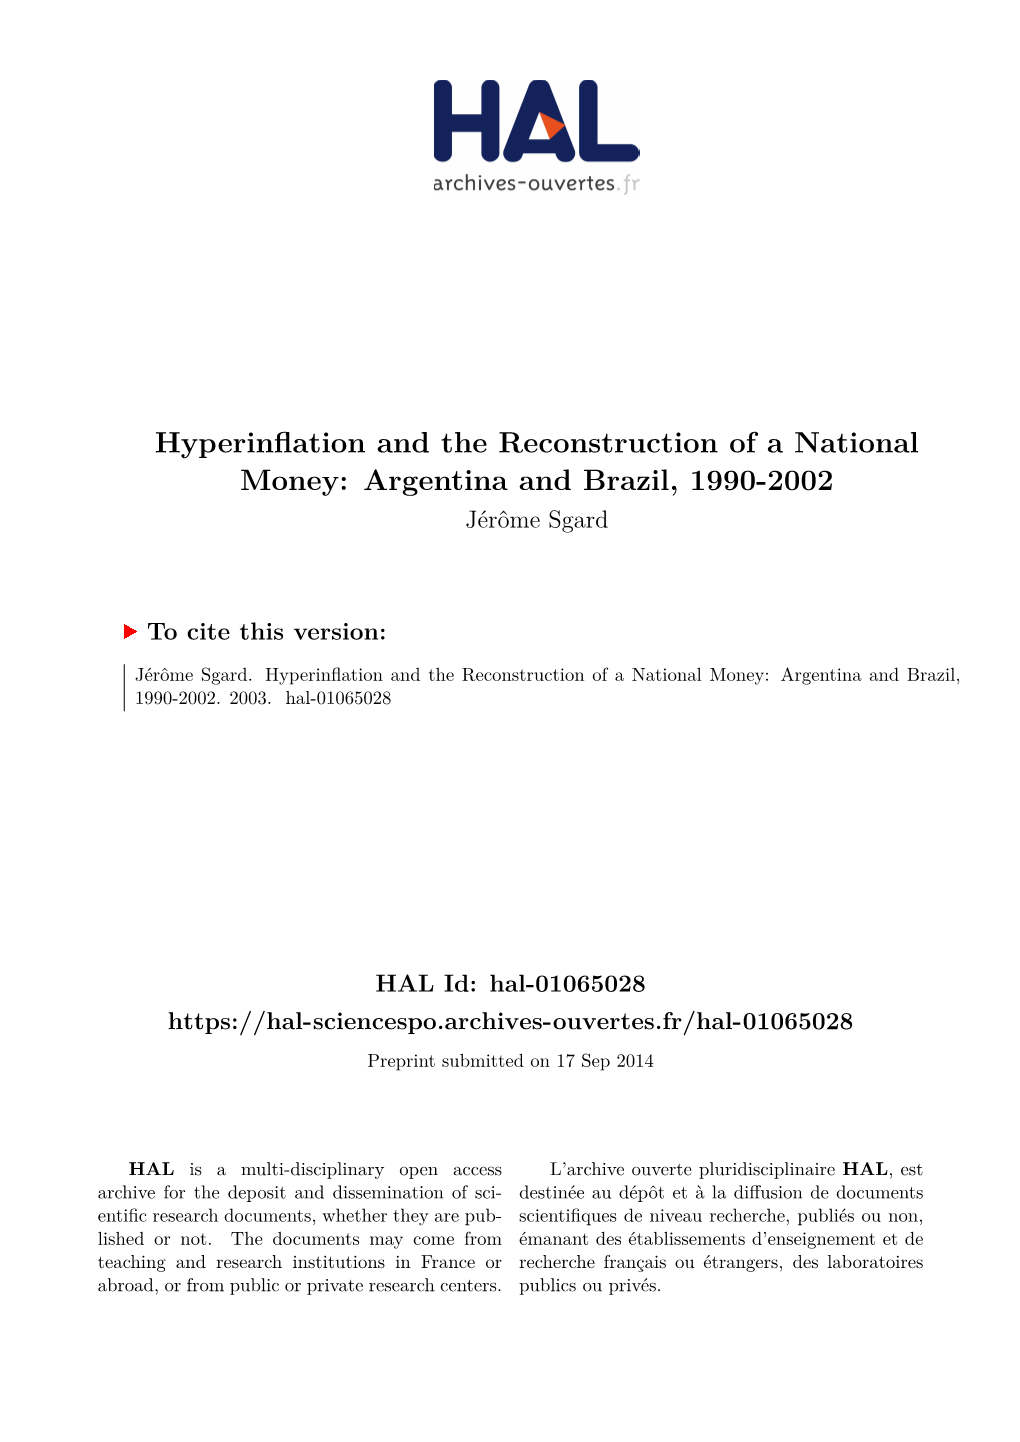 Hyperinflation and the Reconstruction of a National Money: Argentina and Brazil, 1990-2002 Jérôme Sgard